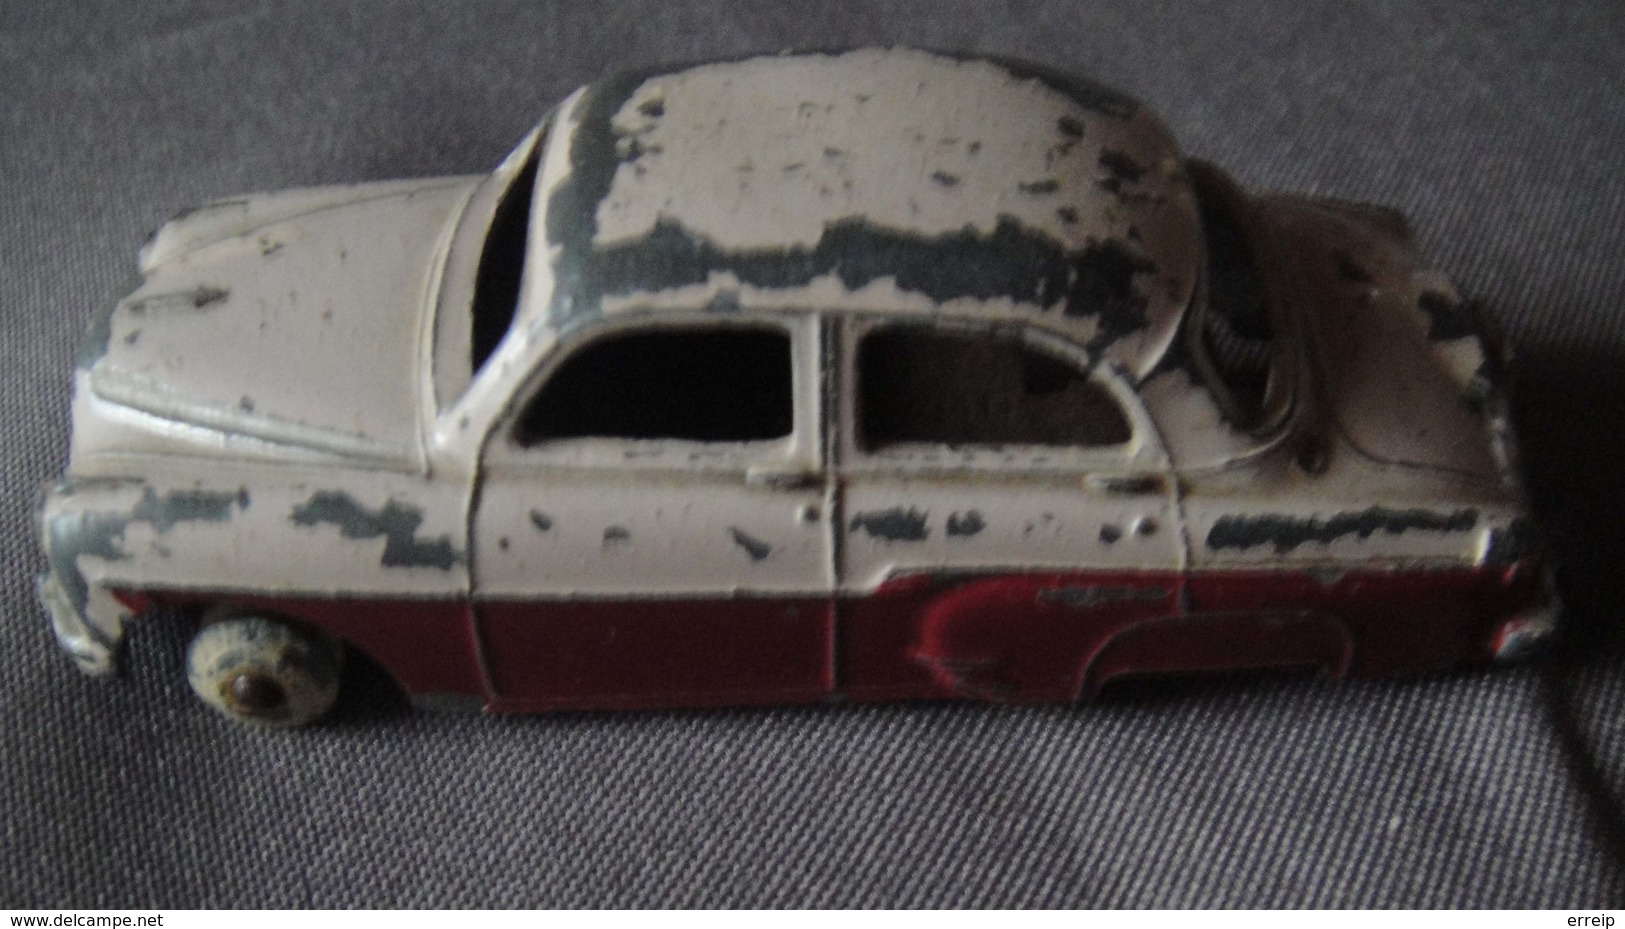 Dinky Toys Vauxhall Cresta Mede In England Meccano LTD N° 164 - Dinky